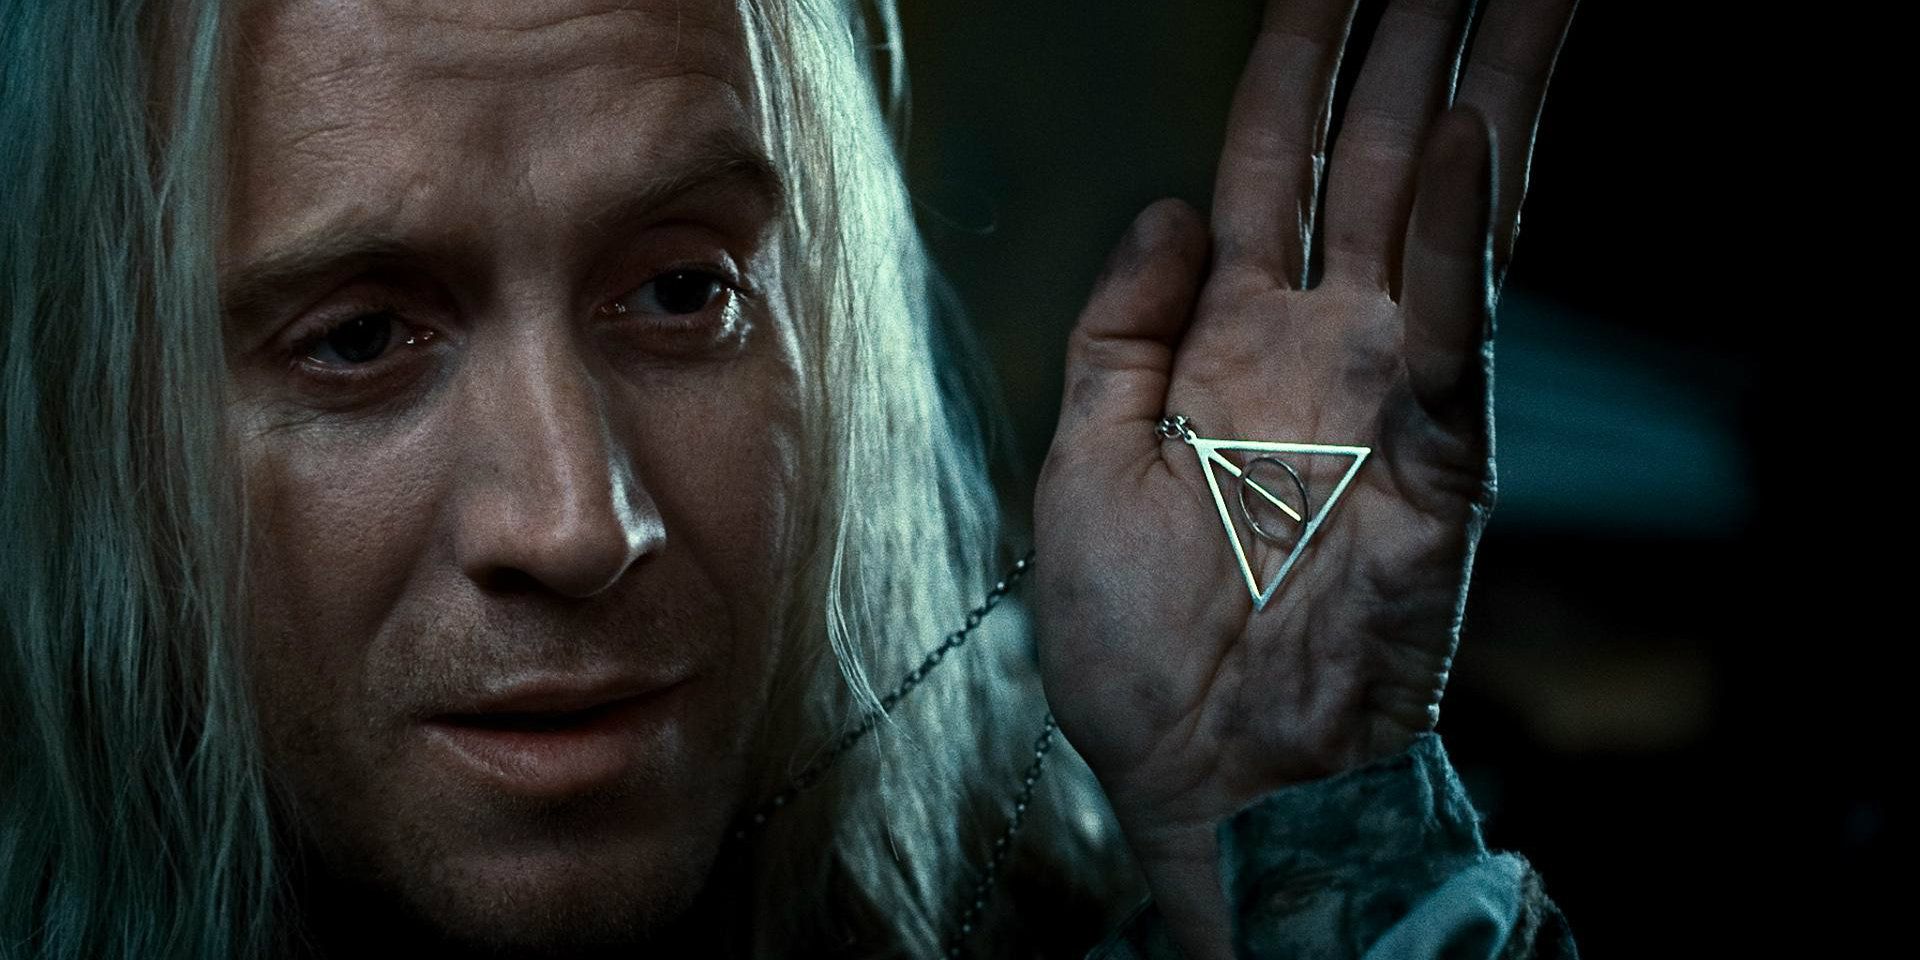 Xenophilius Lovegood holding up the deathly hallows sign necklace